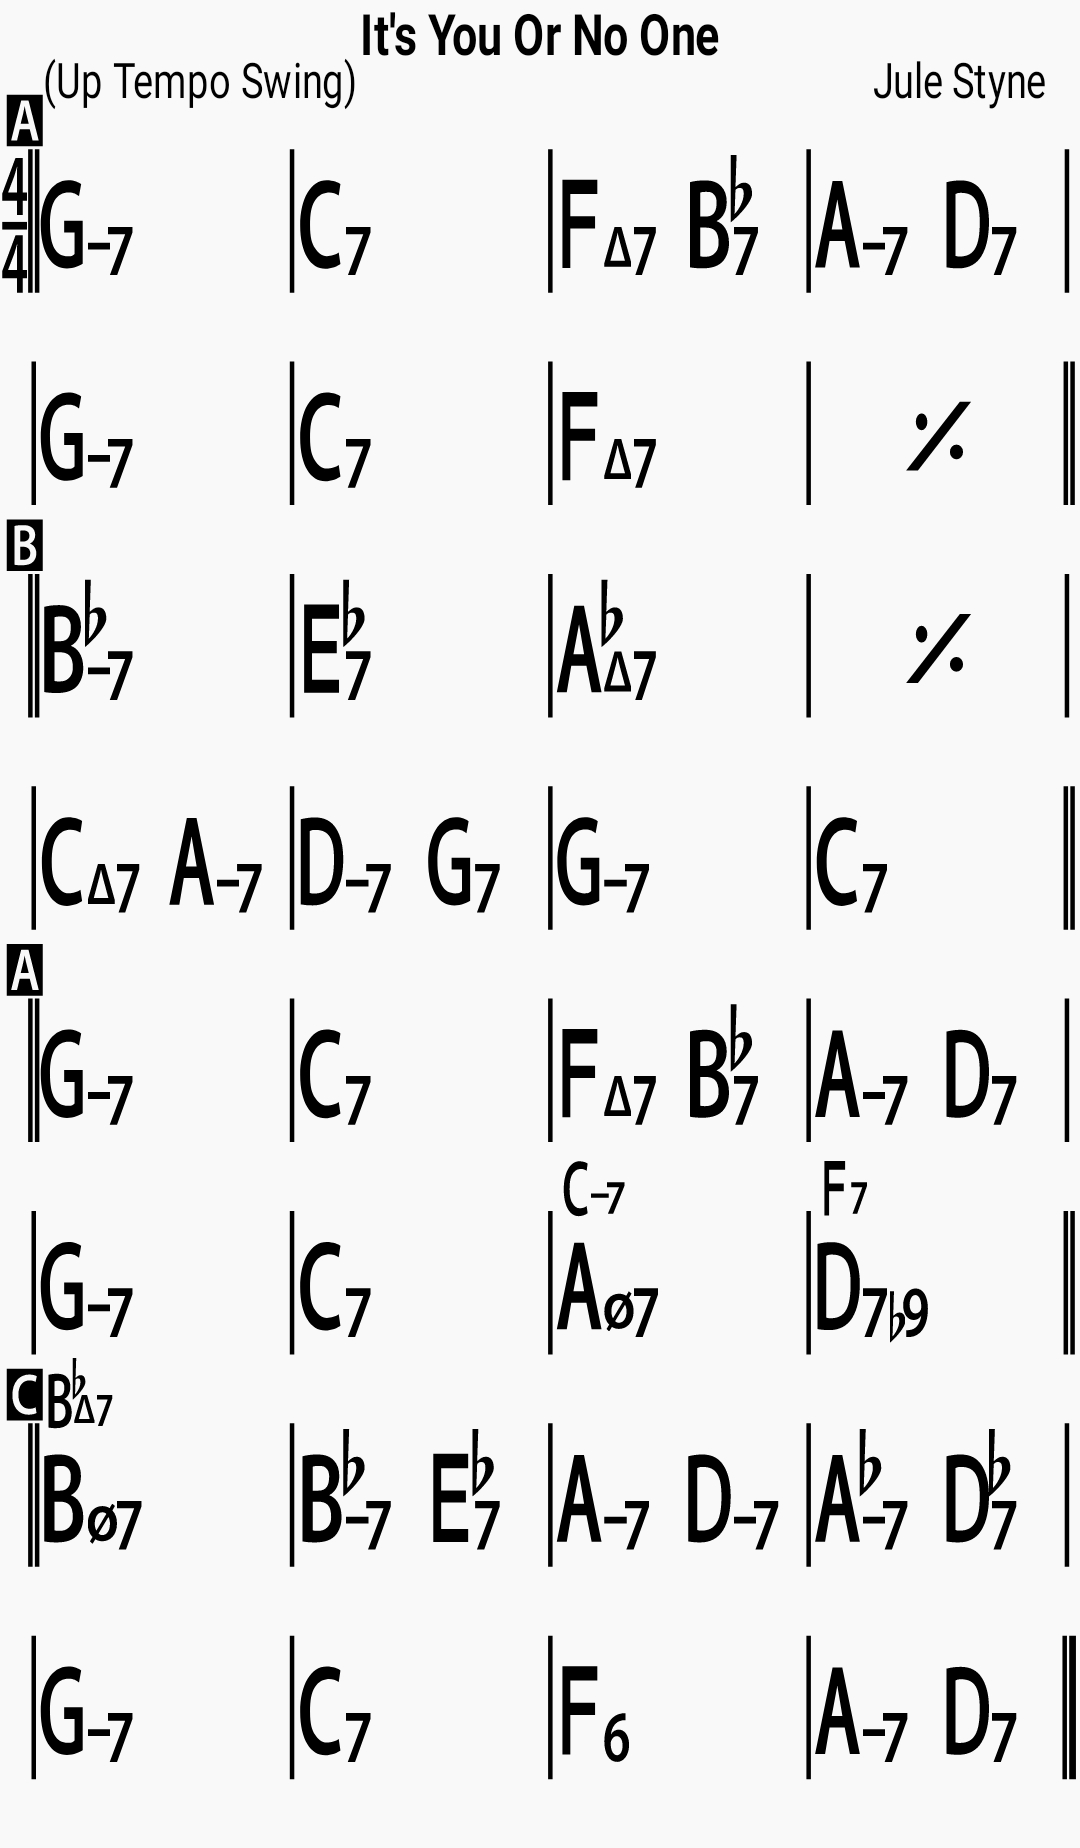 Chord chart for the jazz standard It's You Or No One